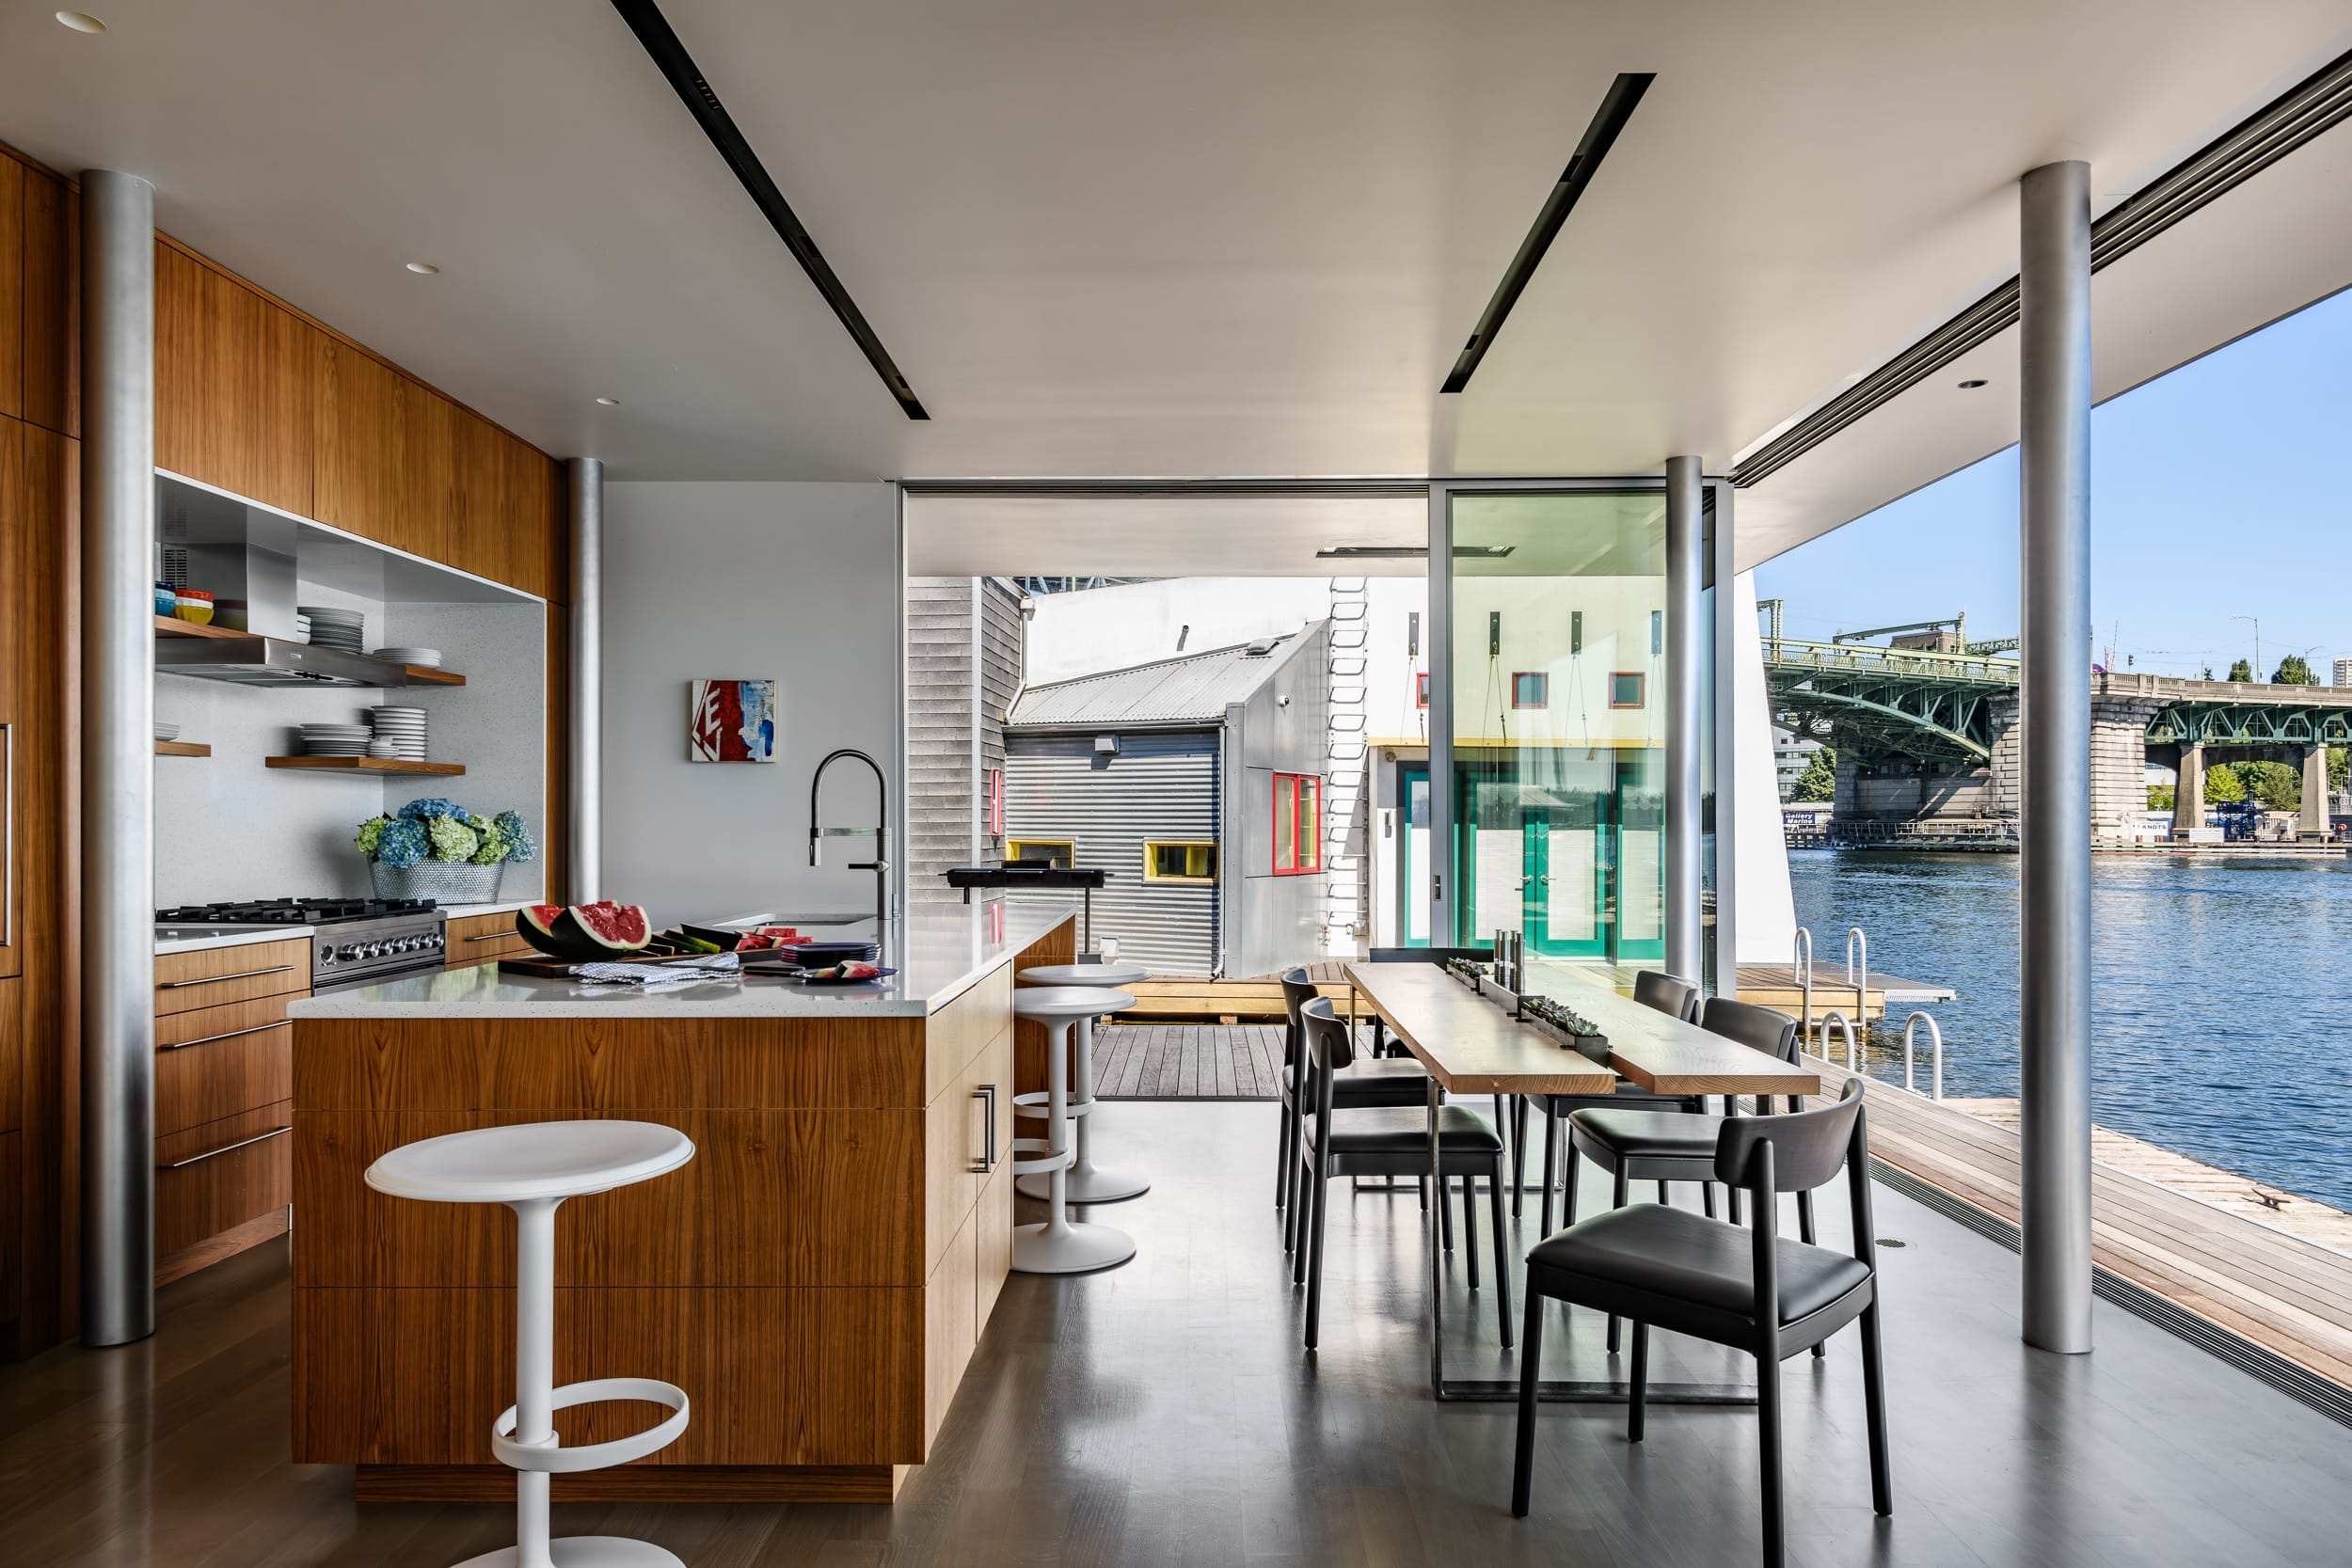 A modern kitchen with a view of the water.